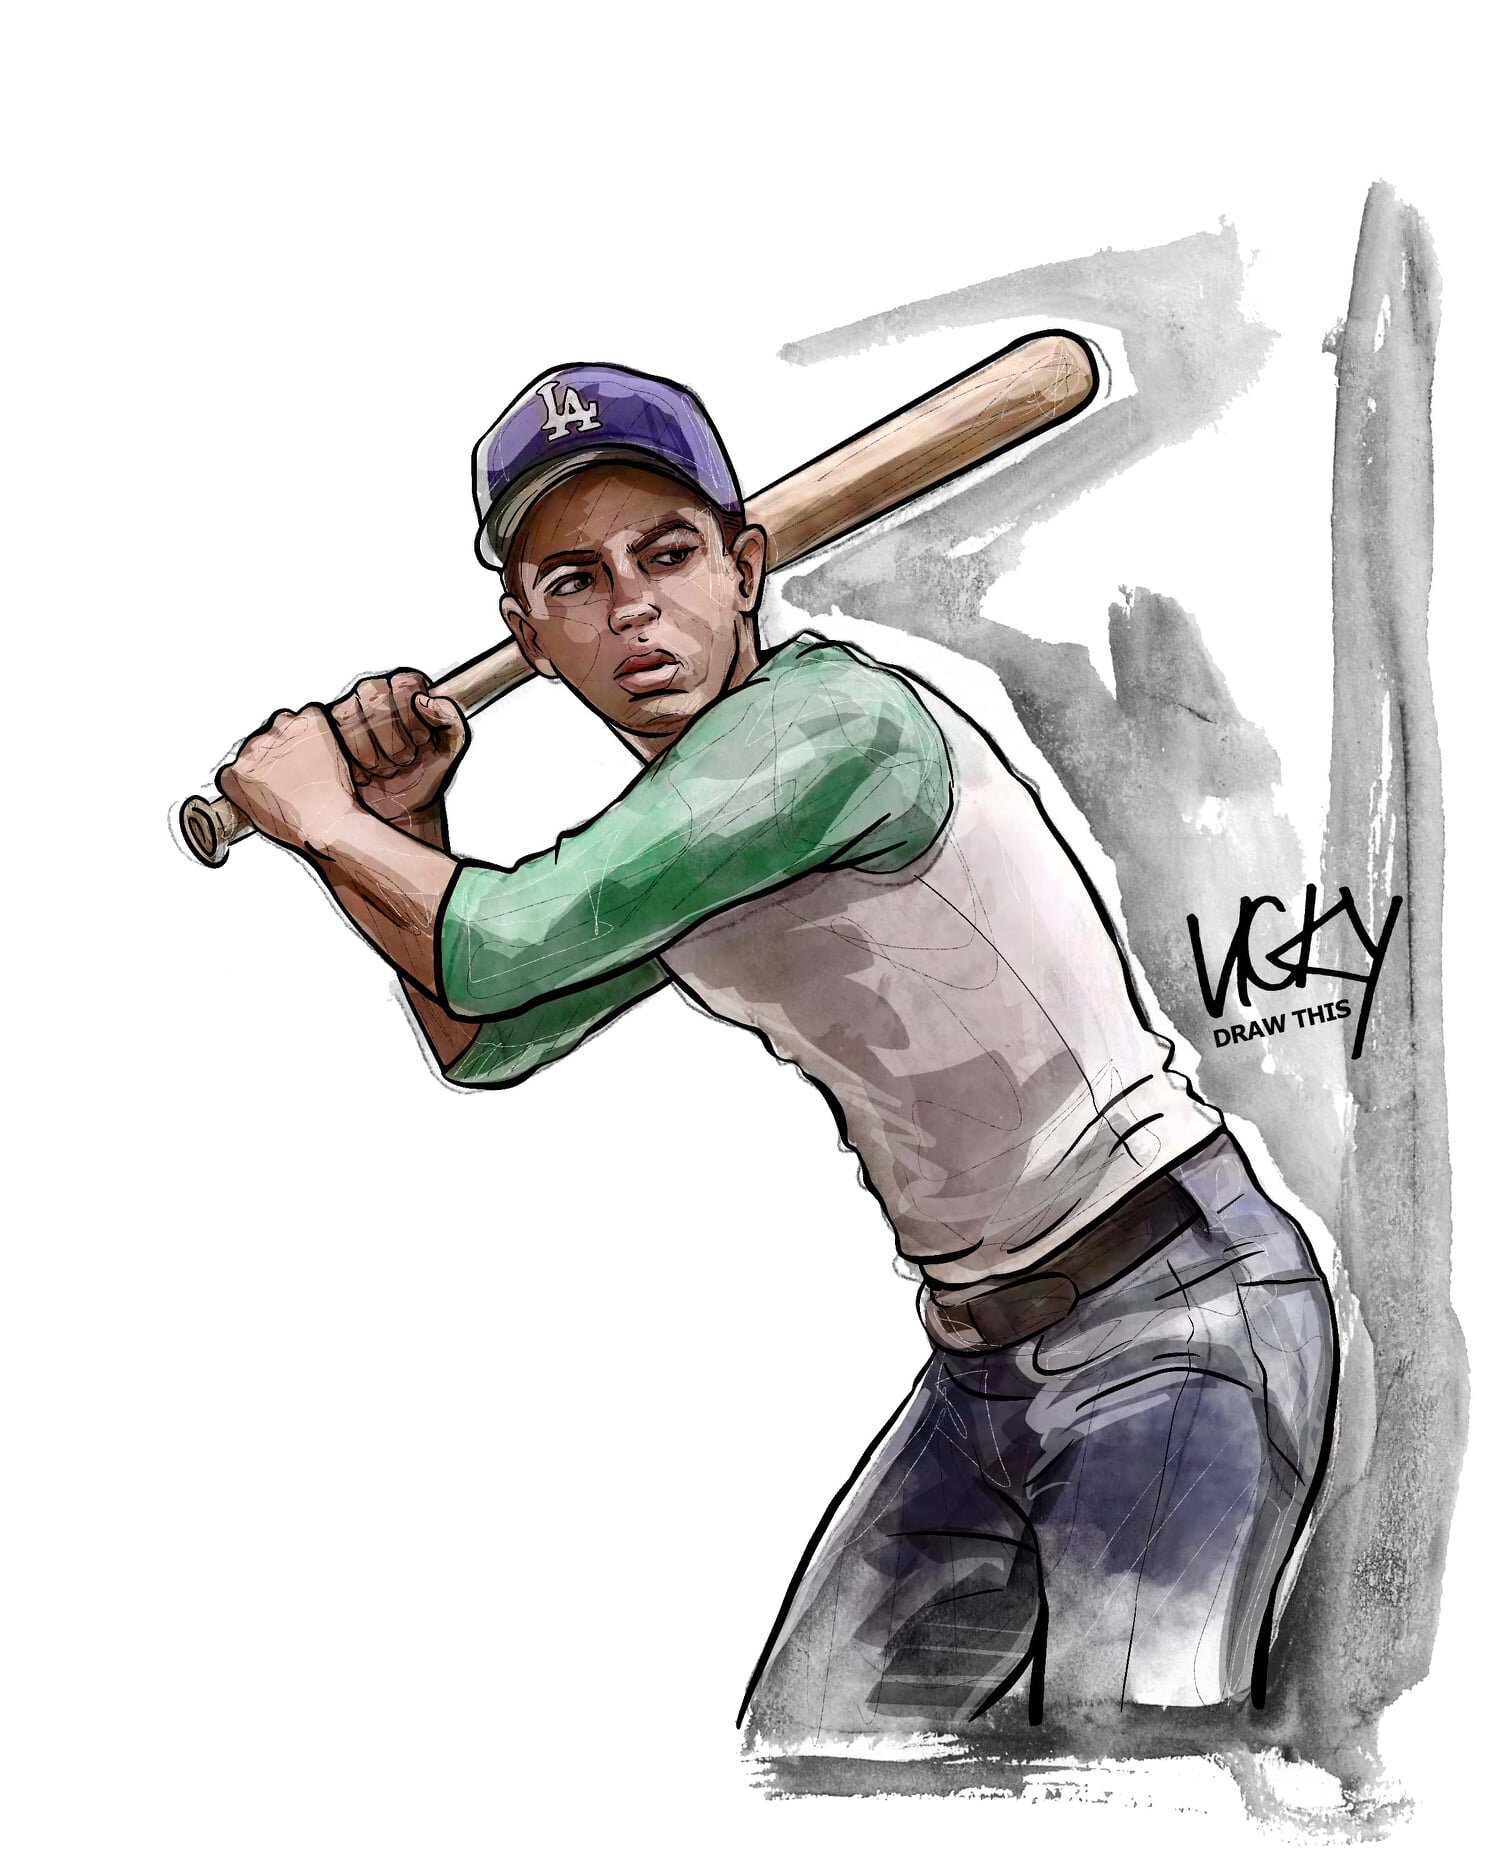 Benny THE JET Rodriguez — Vicky Draw This